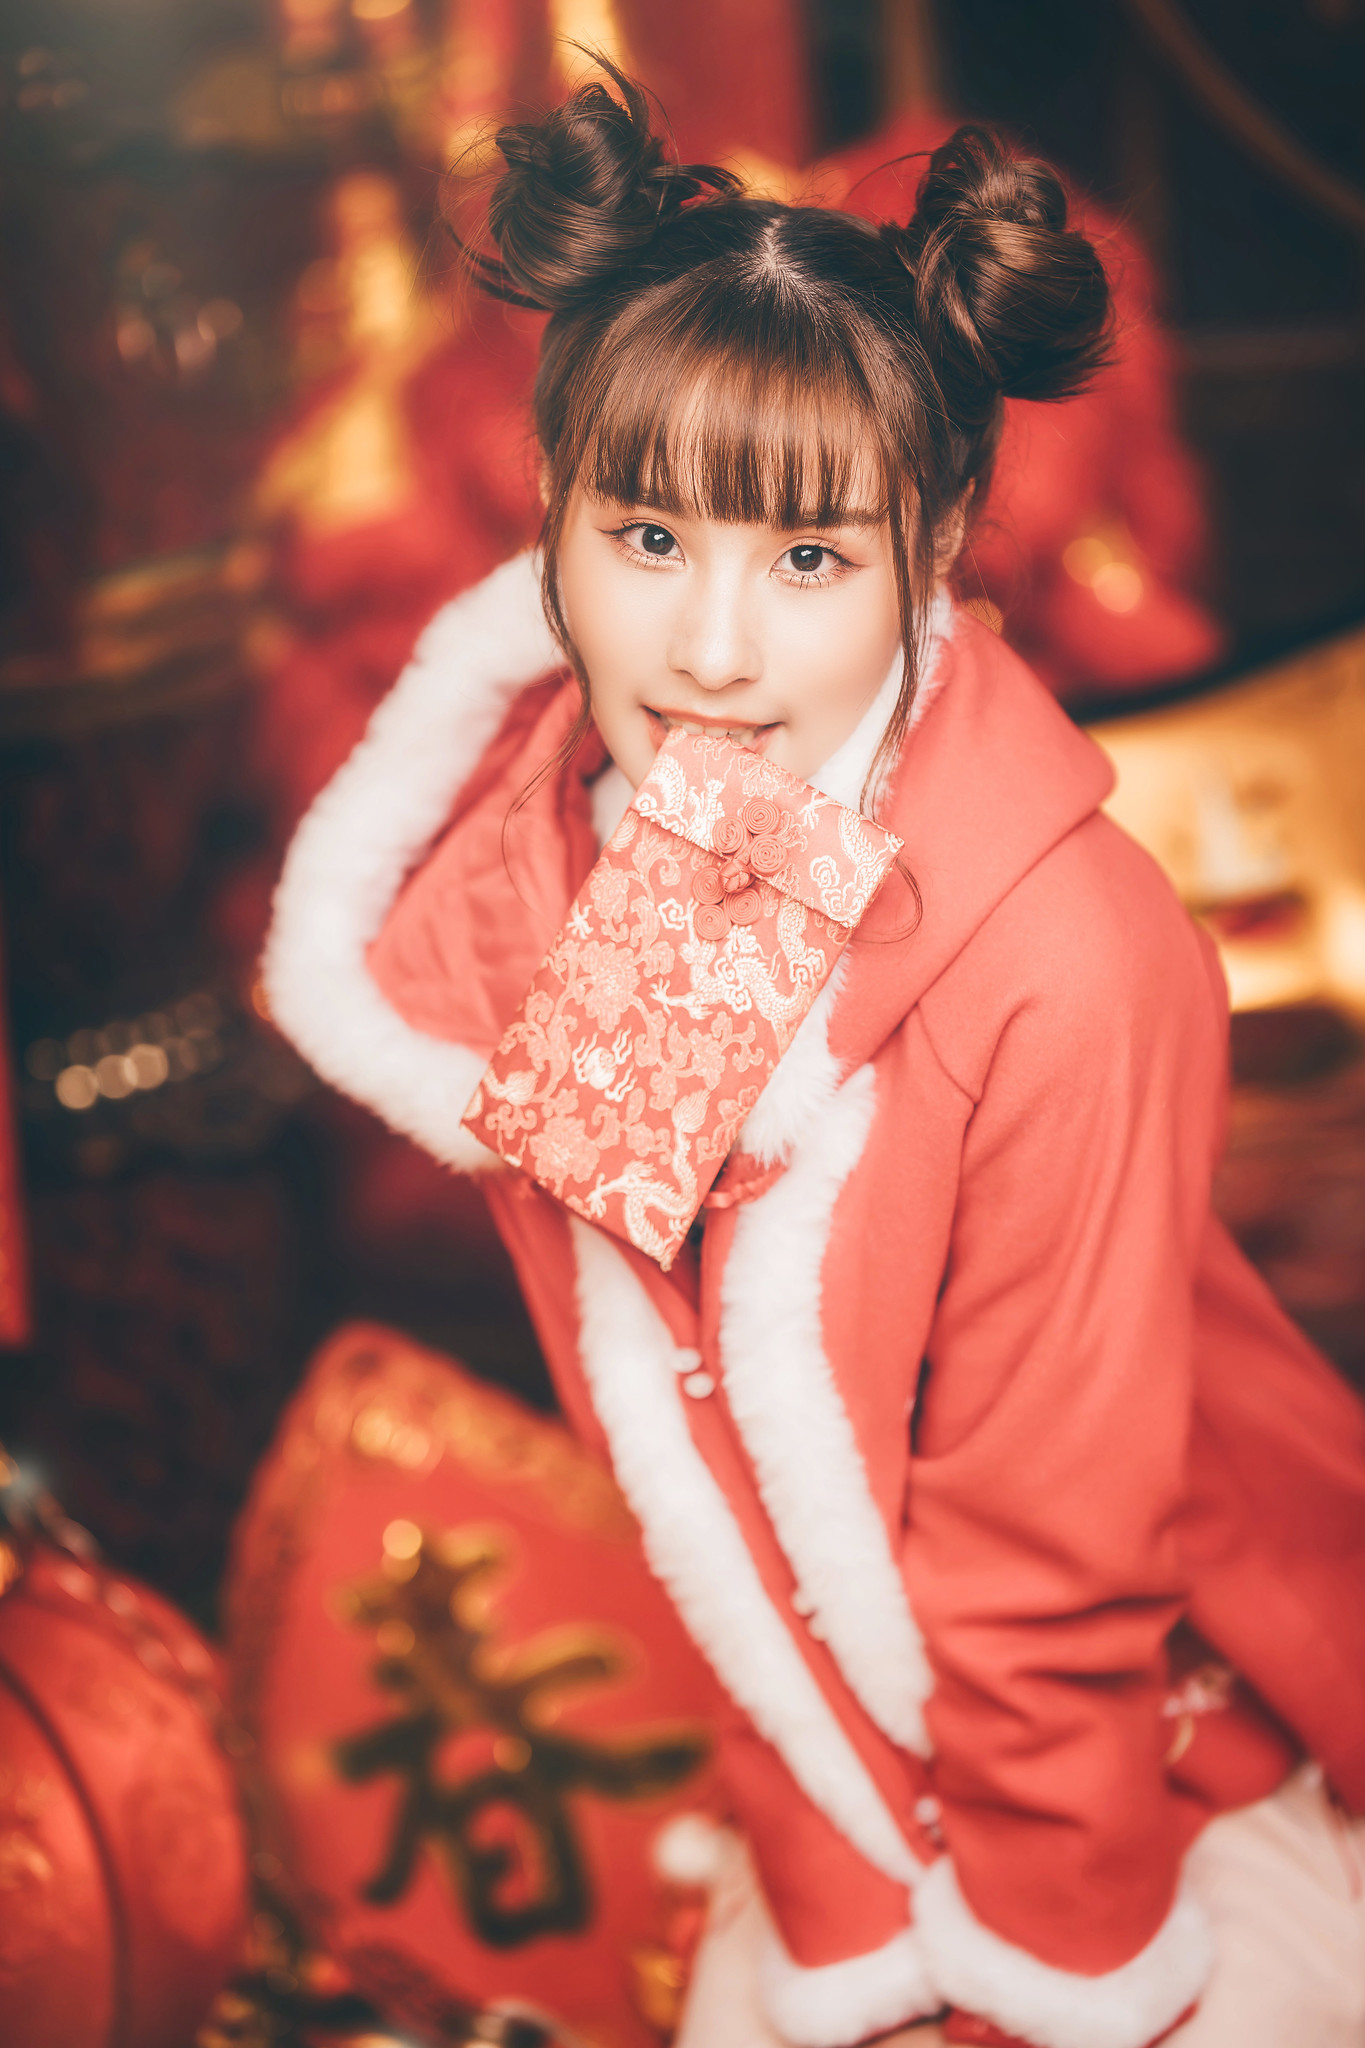 Asian Model Women Christmas Holiday Presents Christmas Presents Red Clothing Looking At Viewer Women 1365x2048